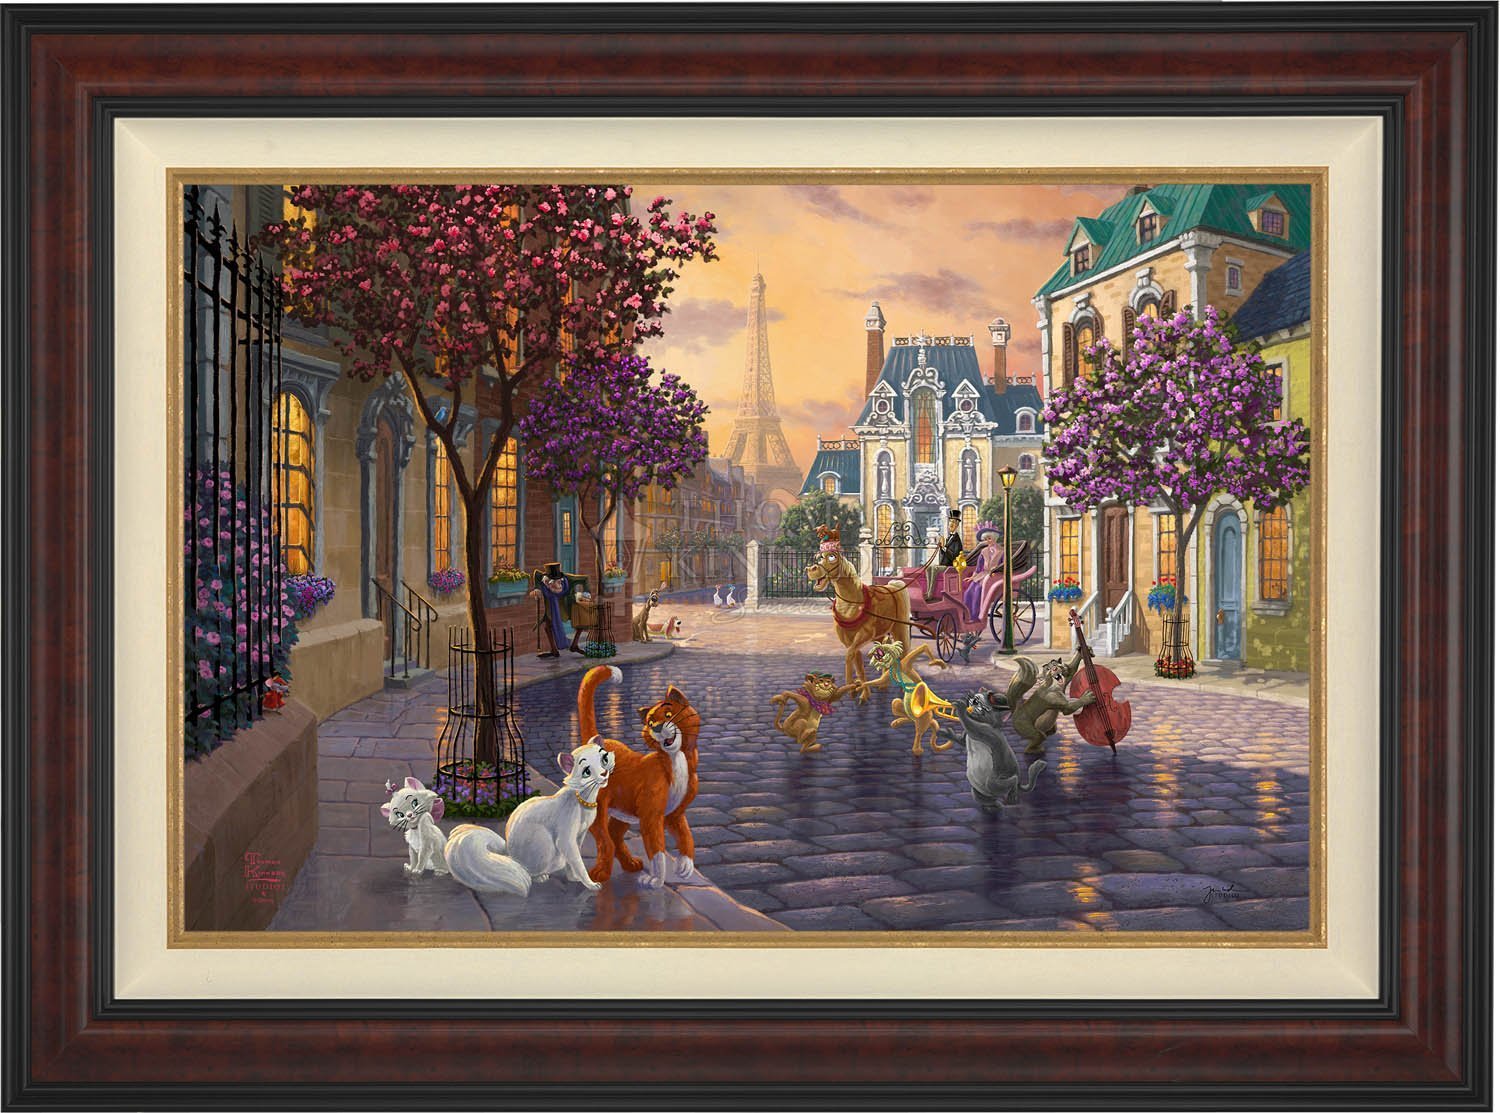 In a Paris neighborhood romance sparks. The older man on the left is Georges, Thomas O’Malley, Duchess and Marie are enjoy an afternoon together - Burl Frame